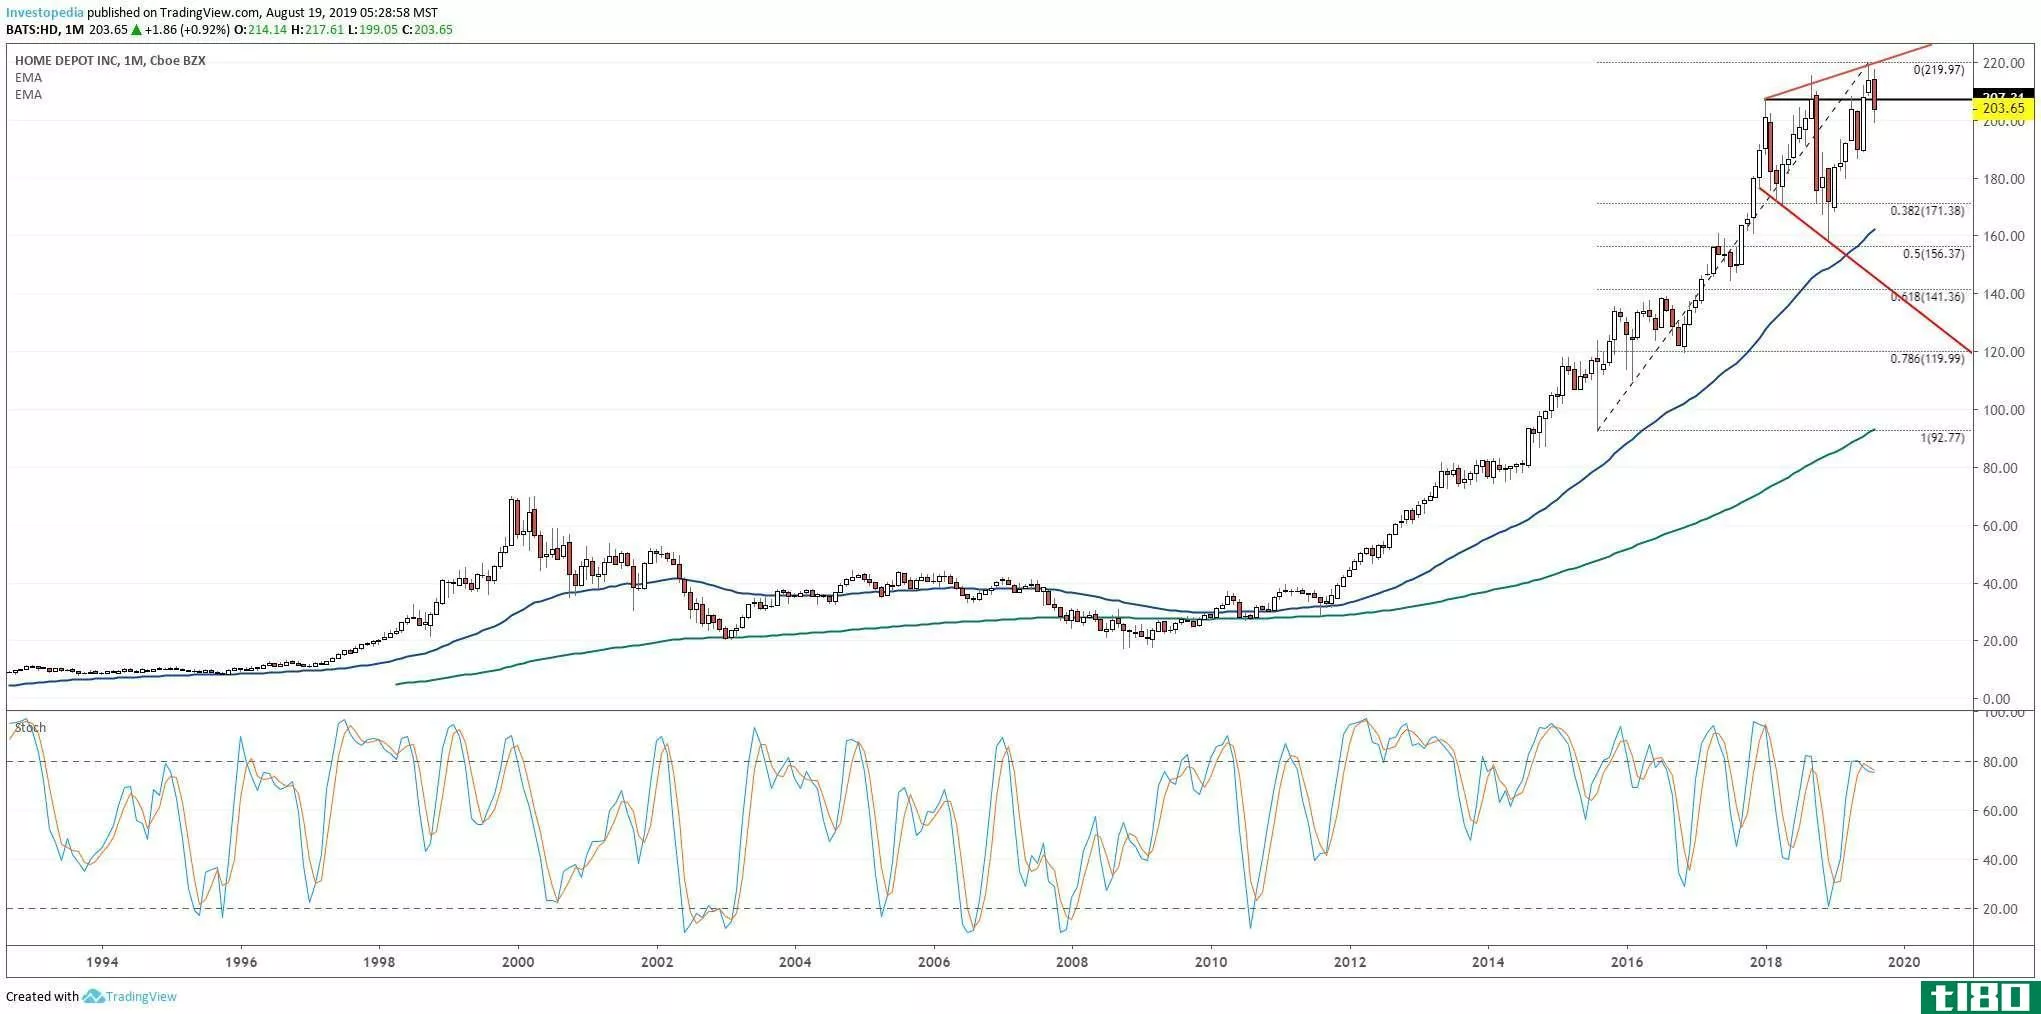 Long-term chart showing the share price performance of The Home Depot, Inc. (HD)